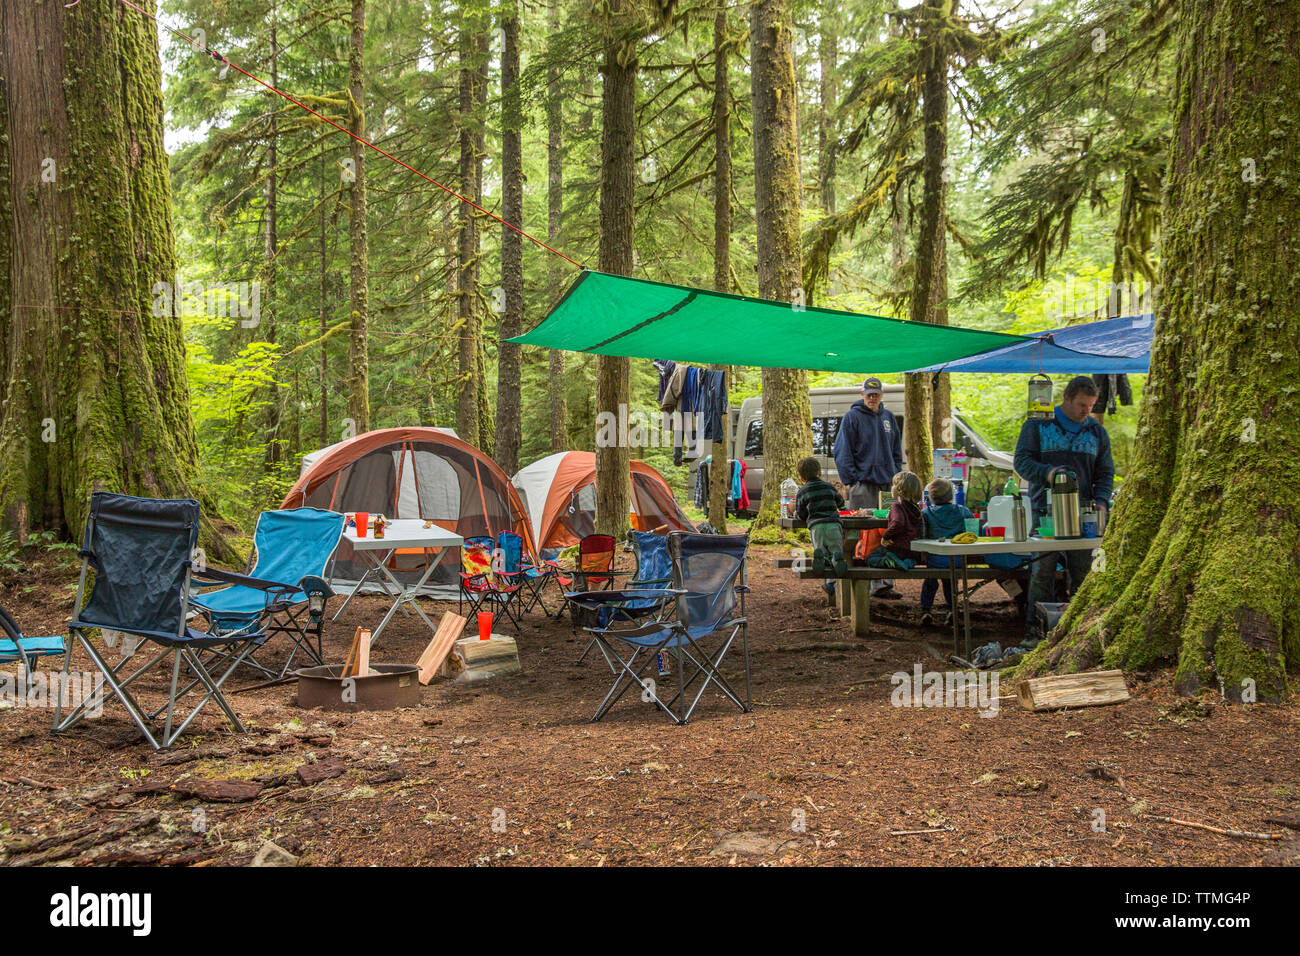 USA, Oregon, Santiam River, Brown Cannon, young boys eating breakfast in a campground near the Santiam River in the Willamete National Forest Stock Photo